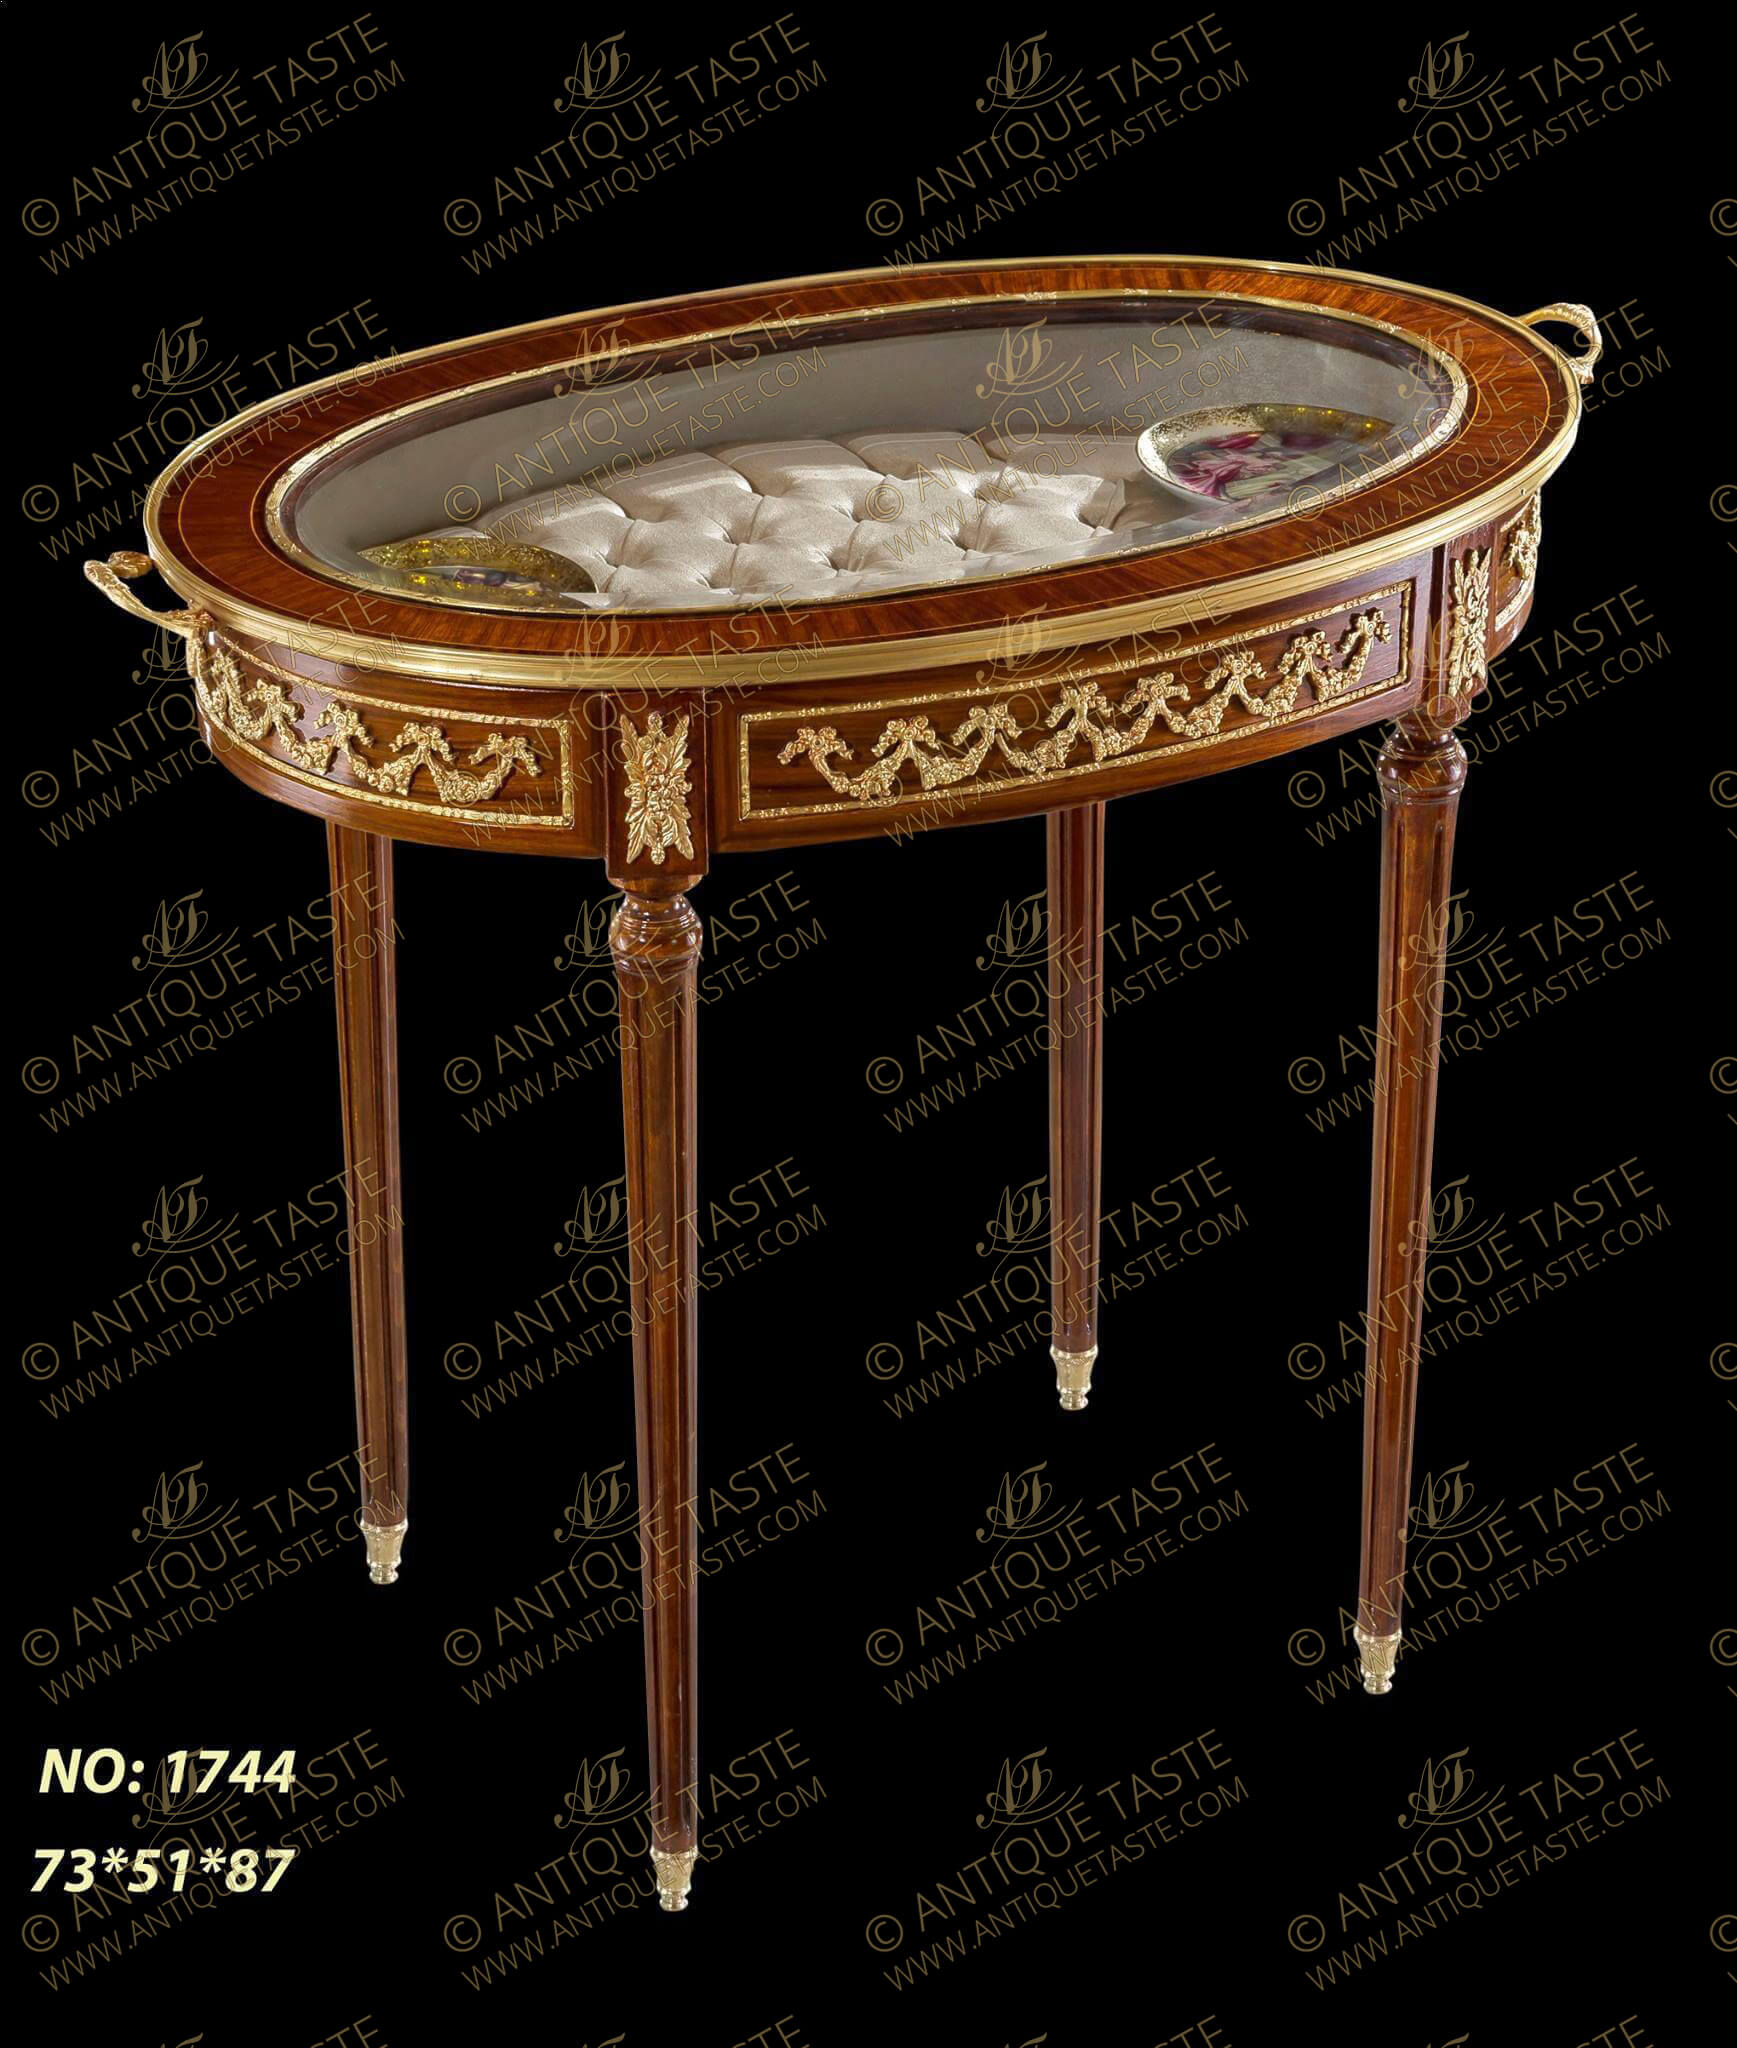 French Louis XVI style ormolu-mounted oval shape bijouterie / vitrine table, The oval removable tray top ornamented with ormolu handles and ormolu strip, upholstered inside in tufting / capitone style above a frieze ormolu mounted with foliate garlands and rosettes. Raised on a fluted tapered legs with ormolu sabots